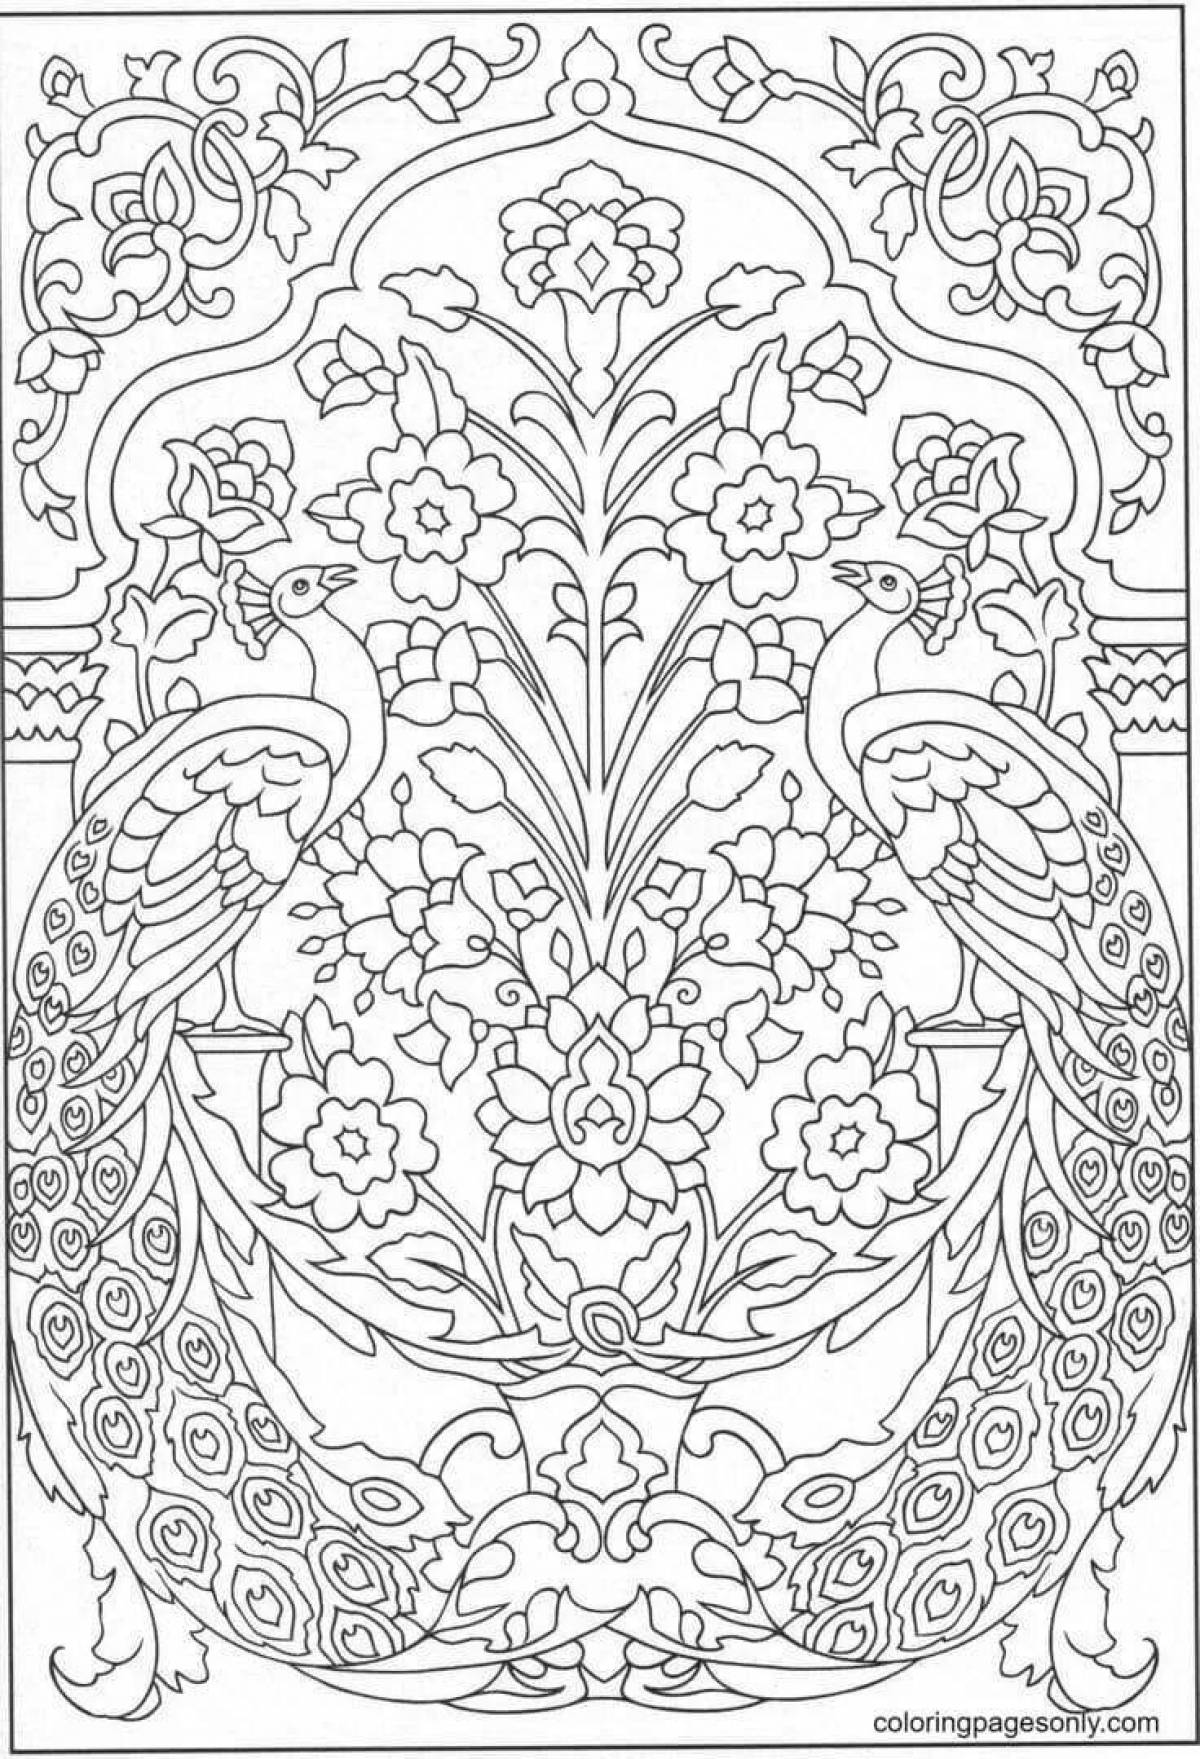 Inspirational coloring book for adults and children